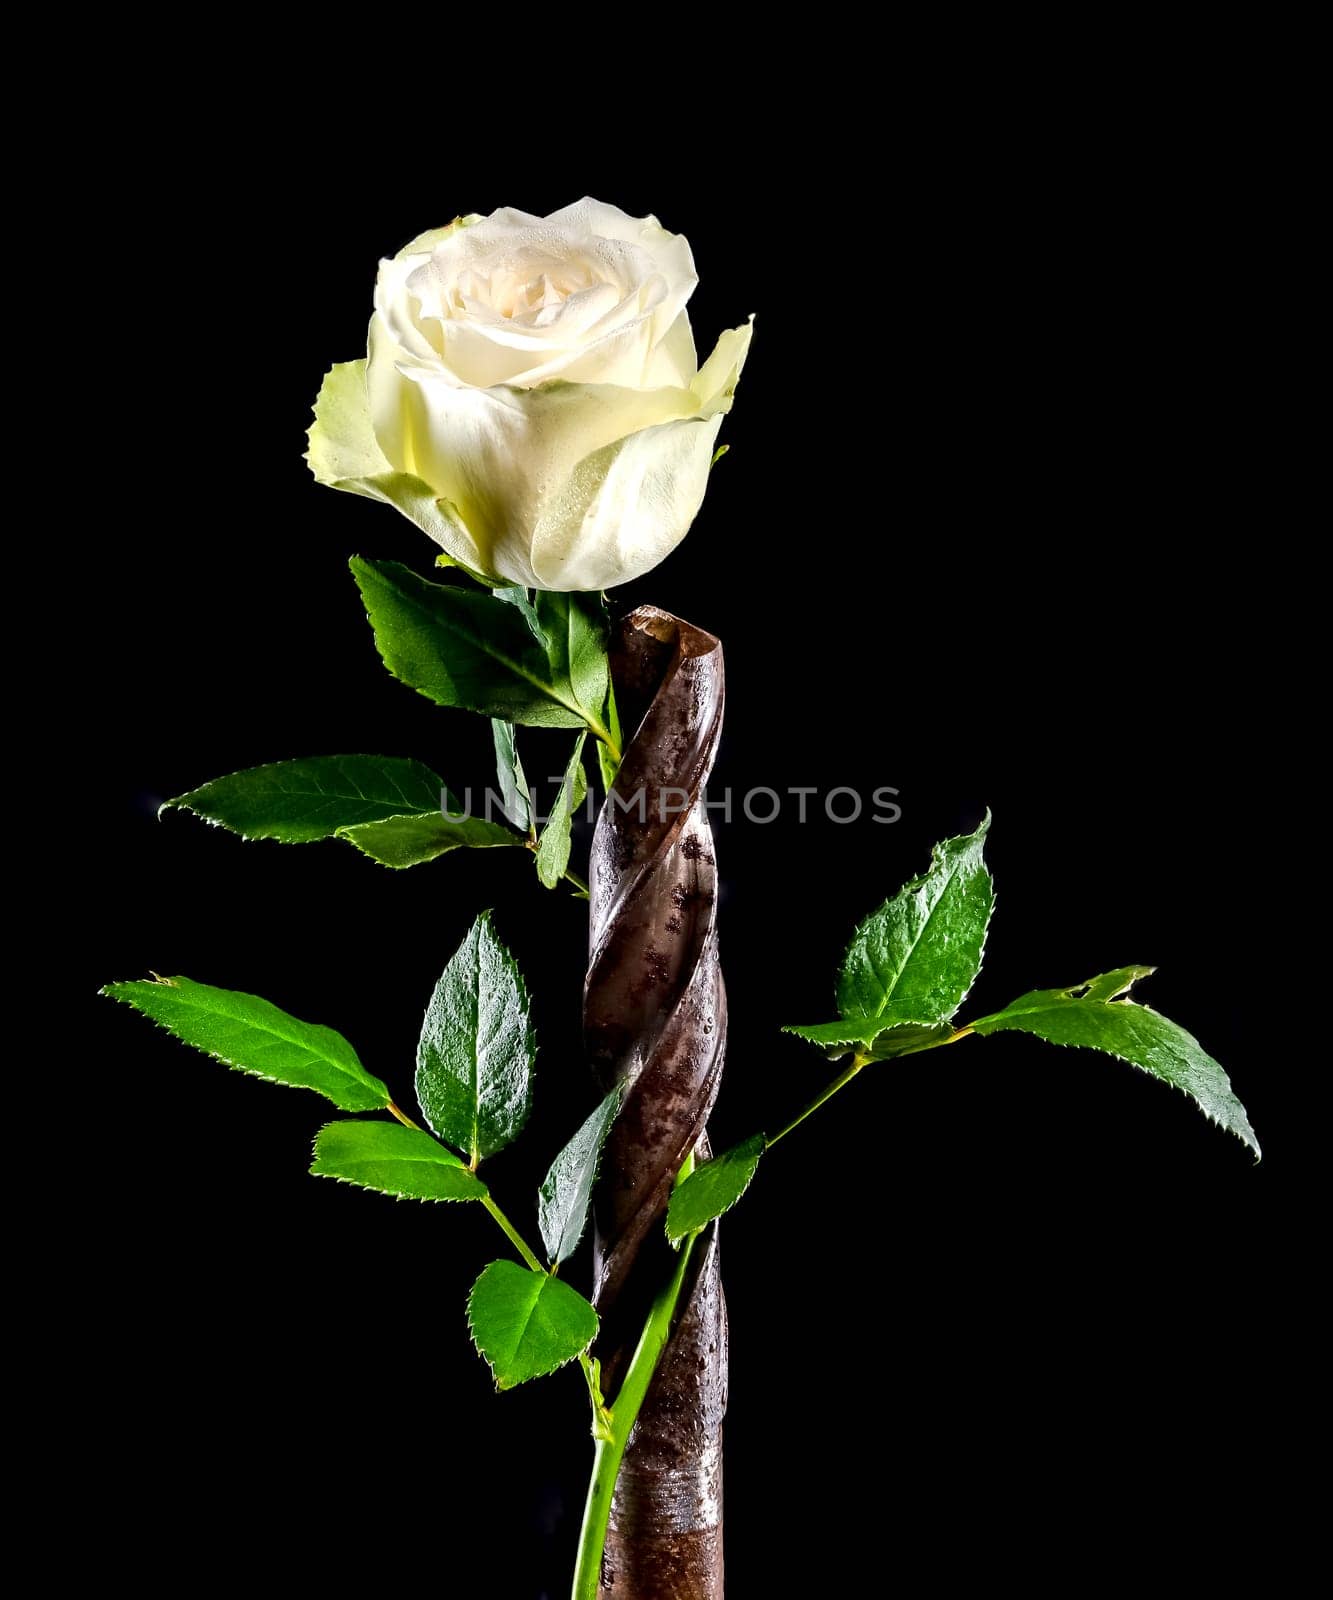 Creative still life with old rusty drill bit and white rose on a black background